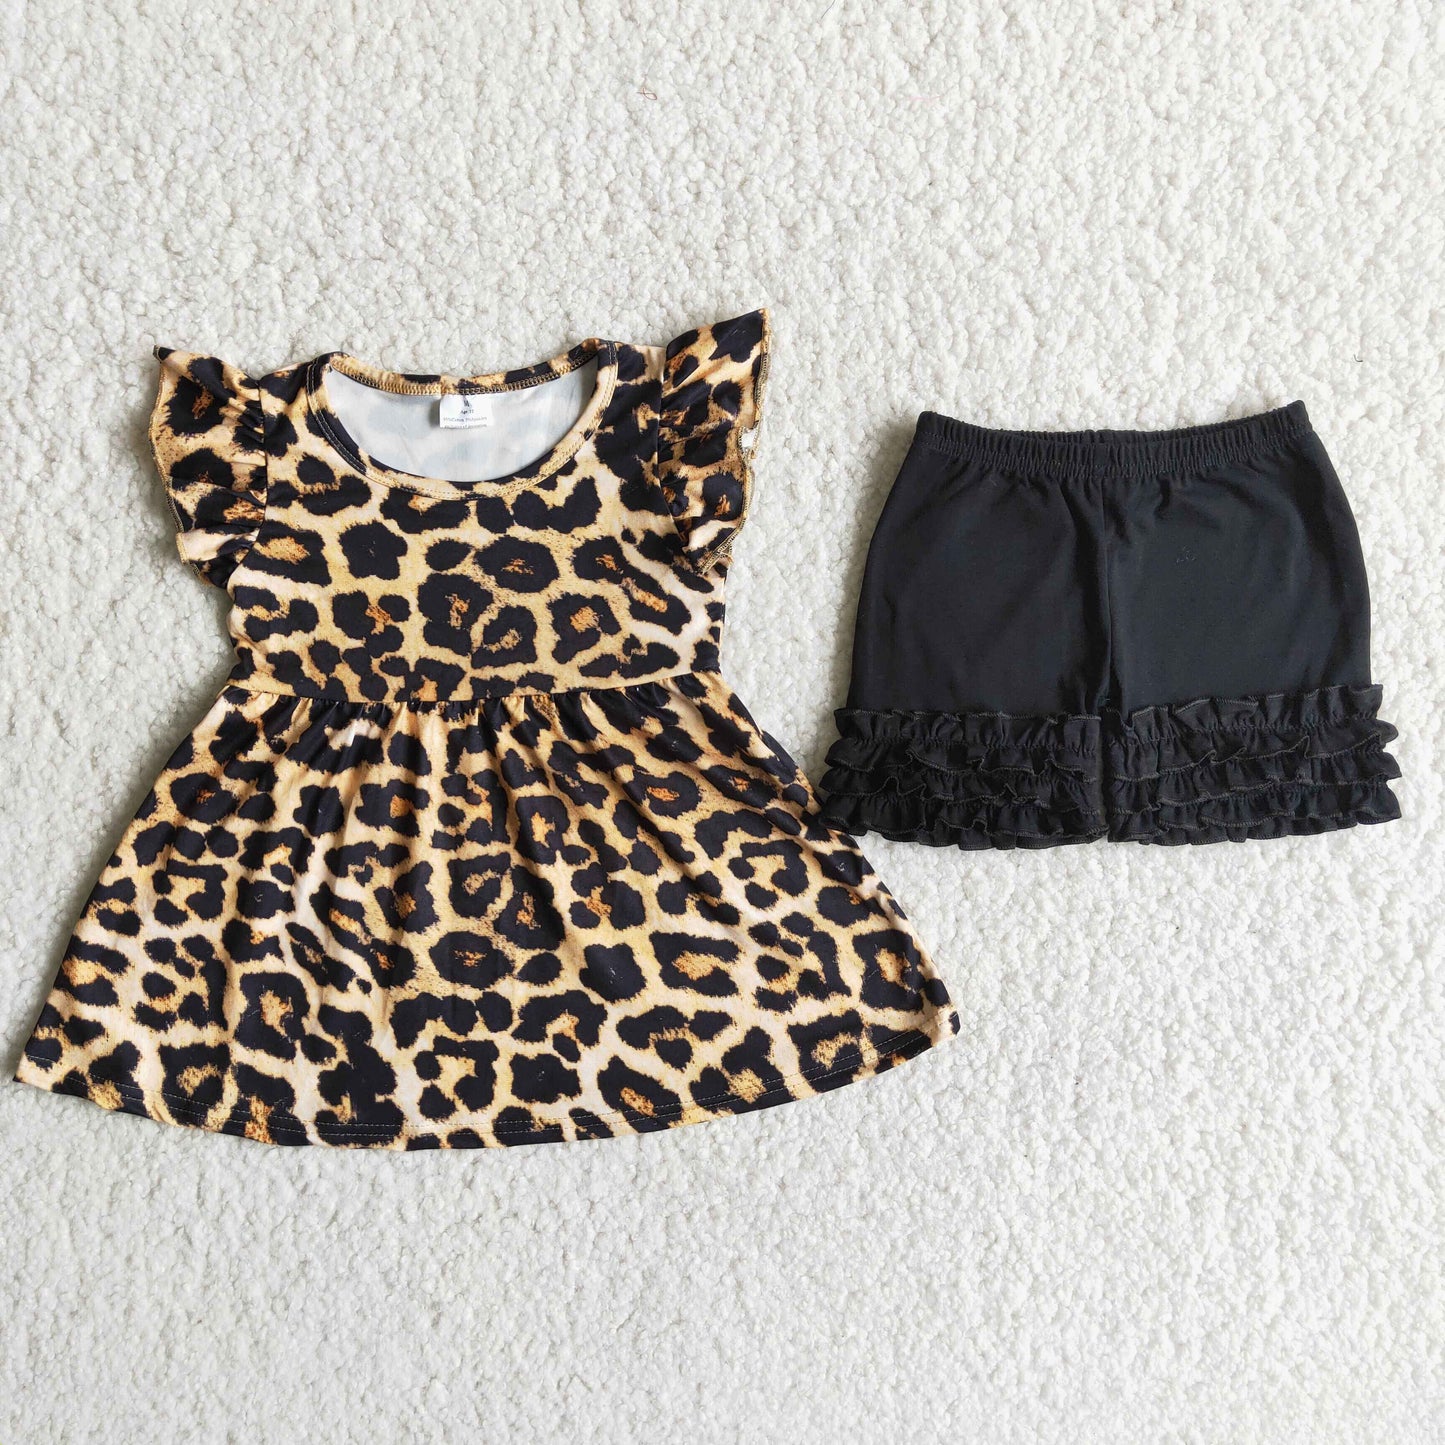 Girls leopard tunic top solid black cotton shorts outfit